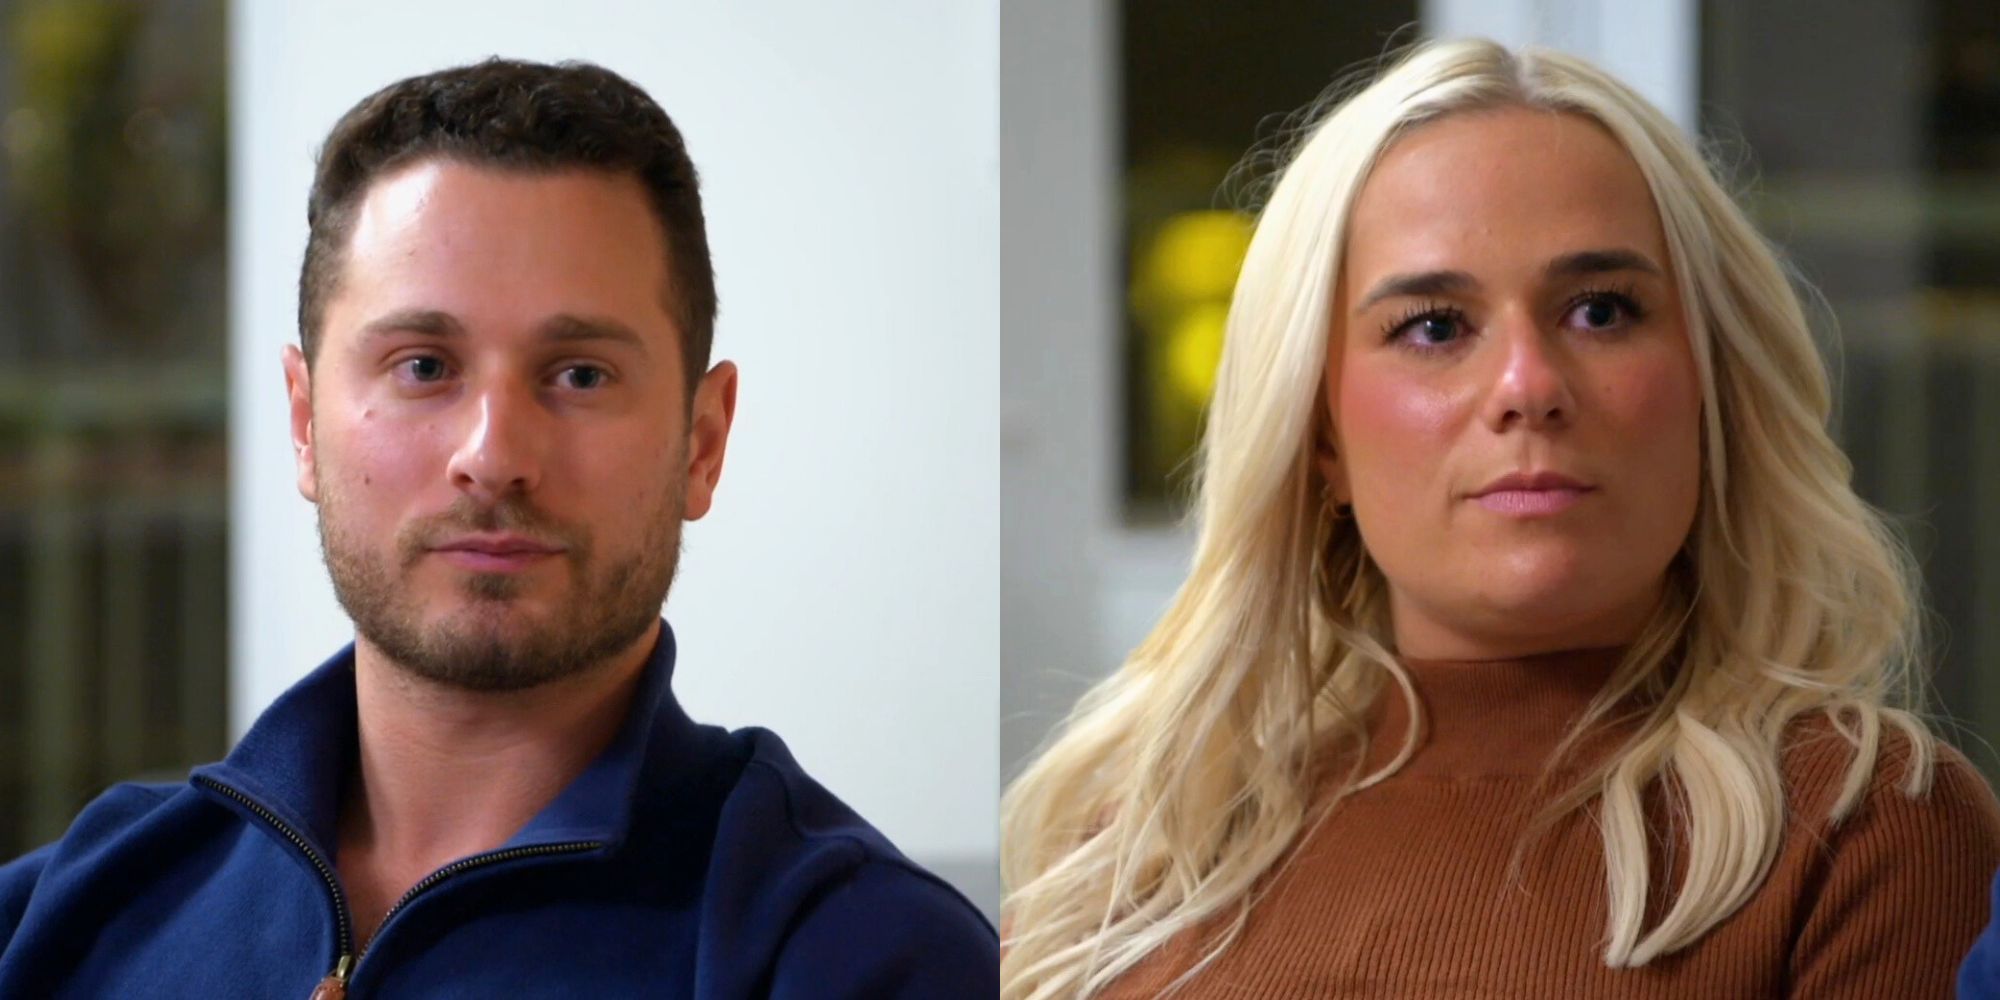 Married At First Sight Season 17: The Real Reason Brennan Called Emily A "Red Flag"